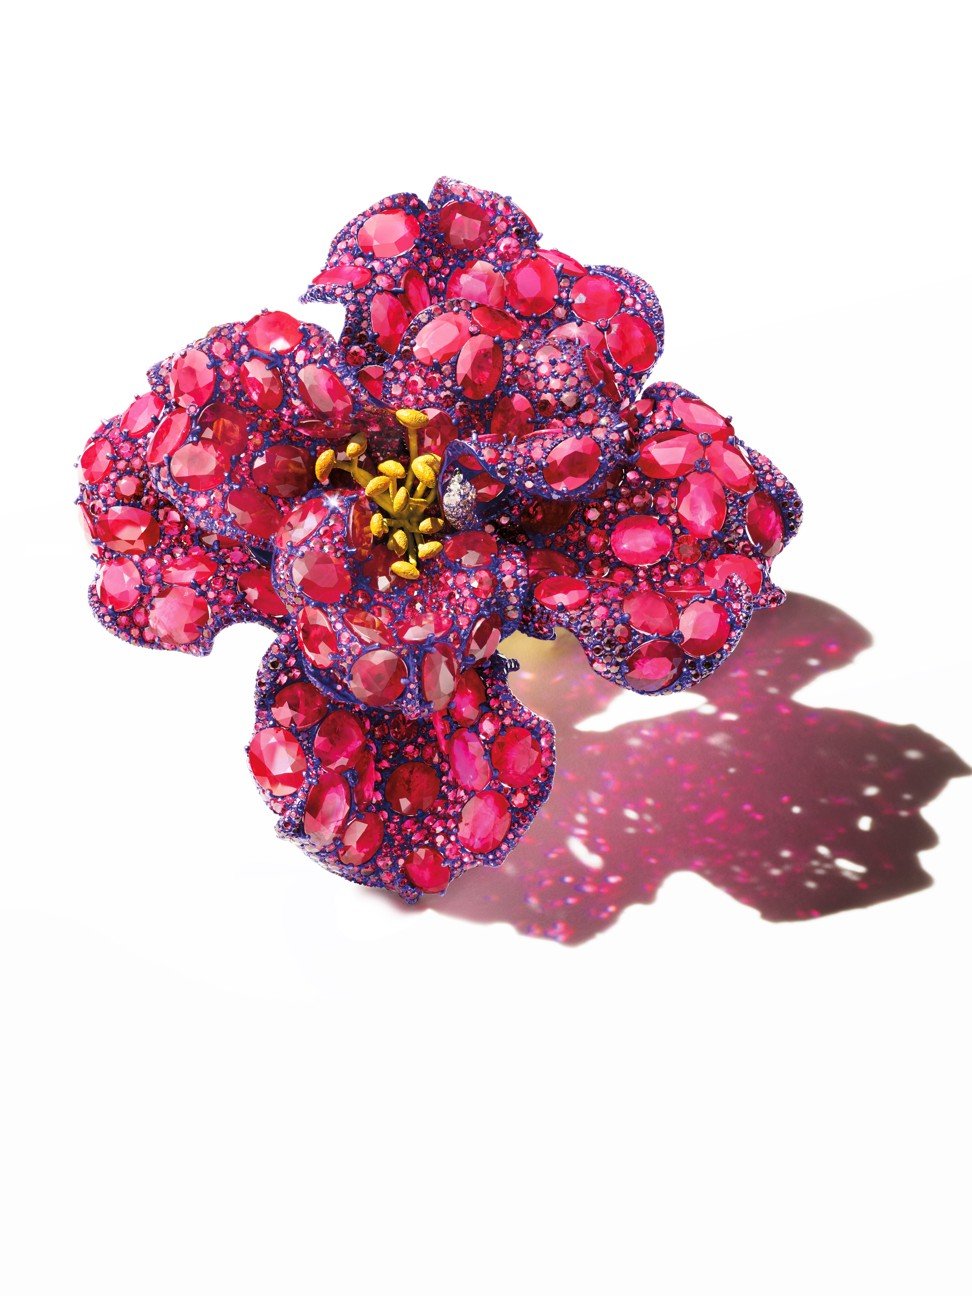 The award-winning Peony Brooch from the Cindy Chao The Art Jewel’s Black Label Masterpieces collection.